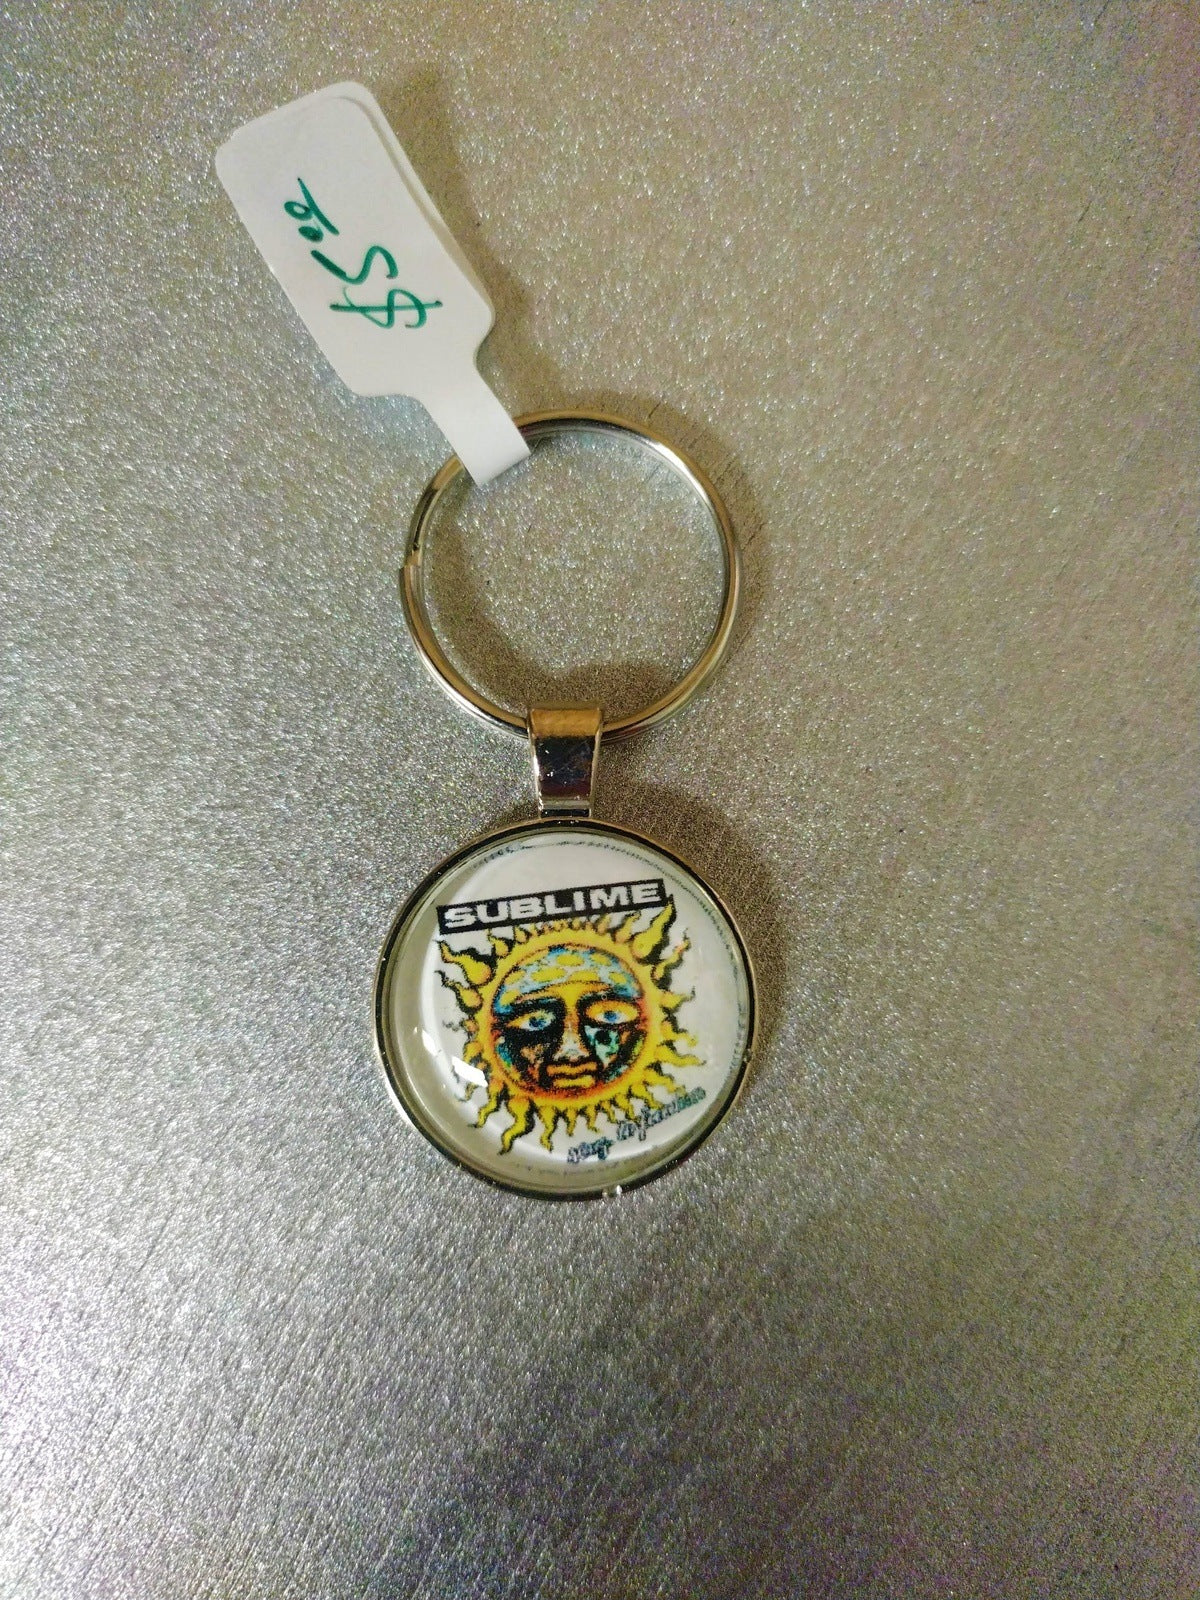 Sublime 1 Inch Keychain